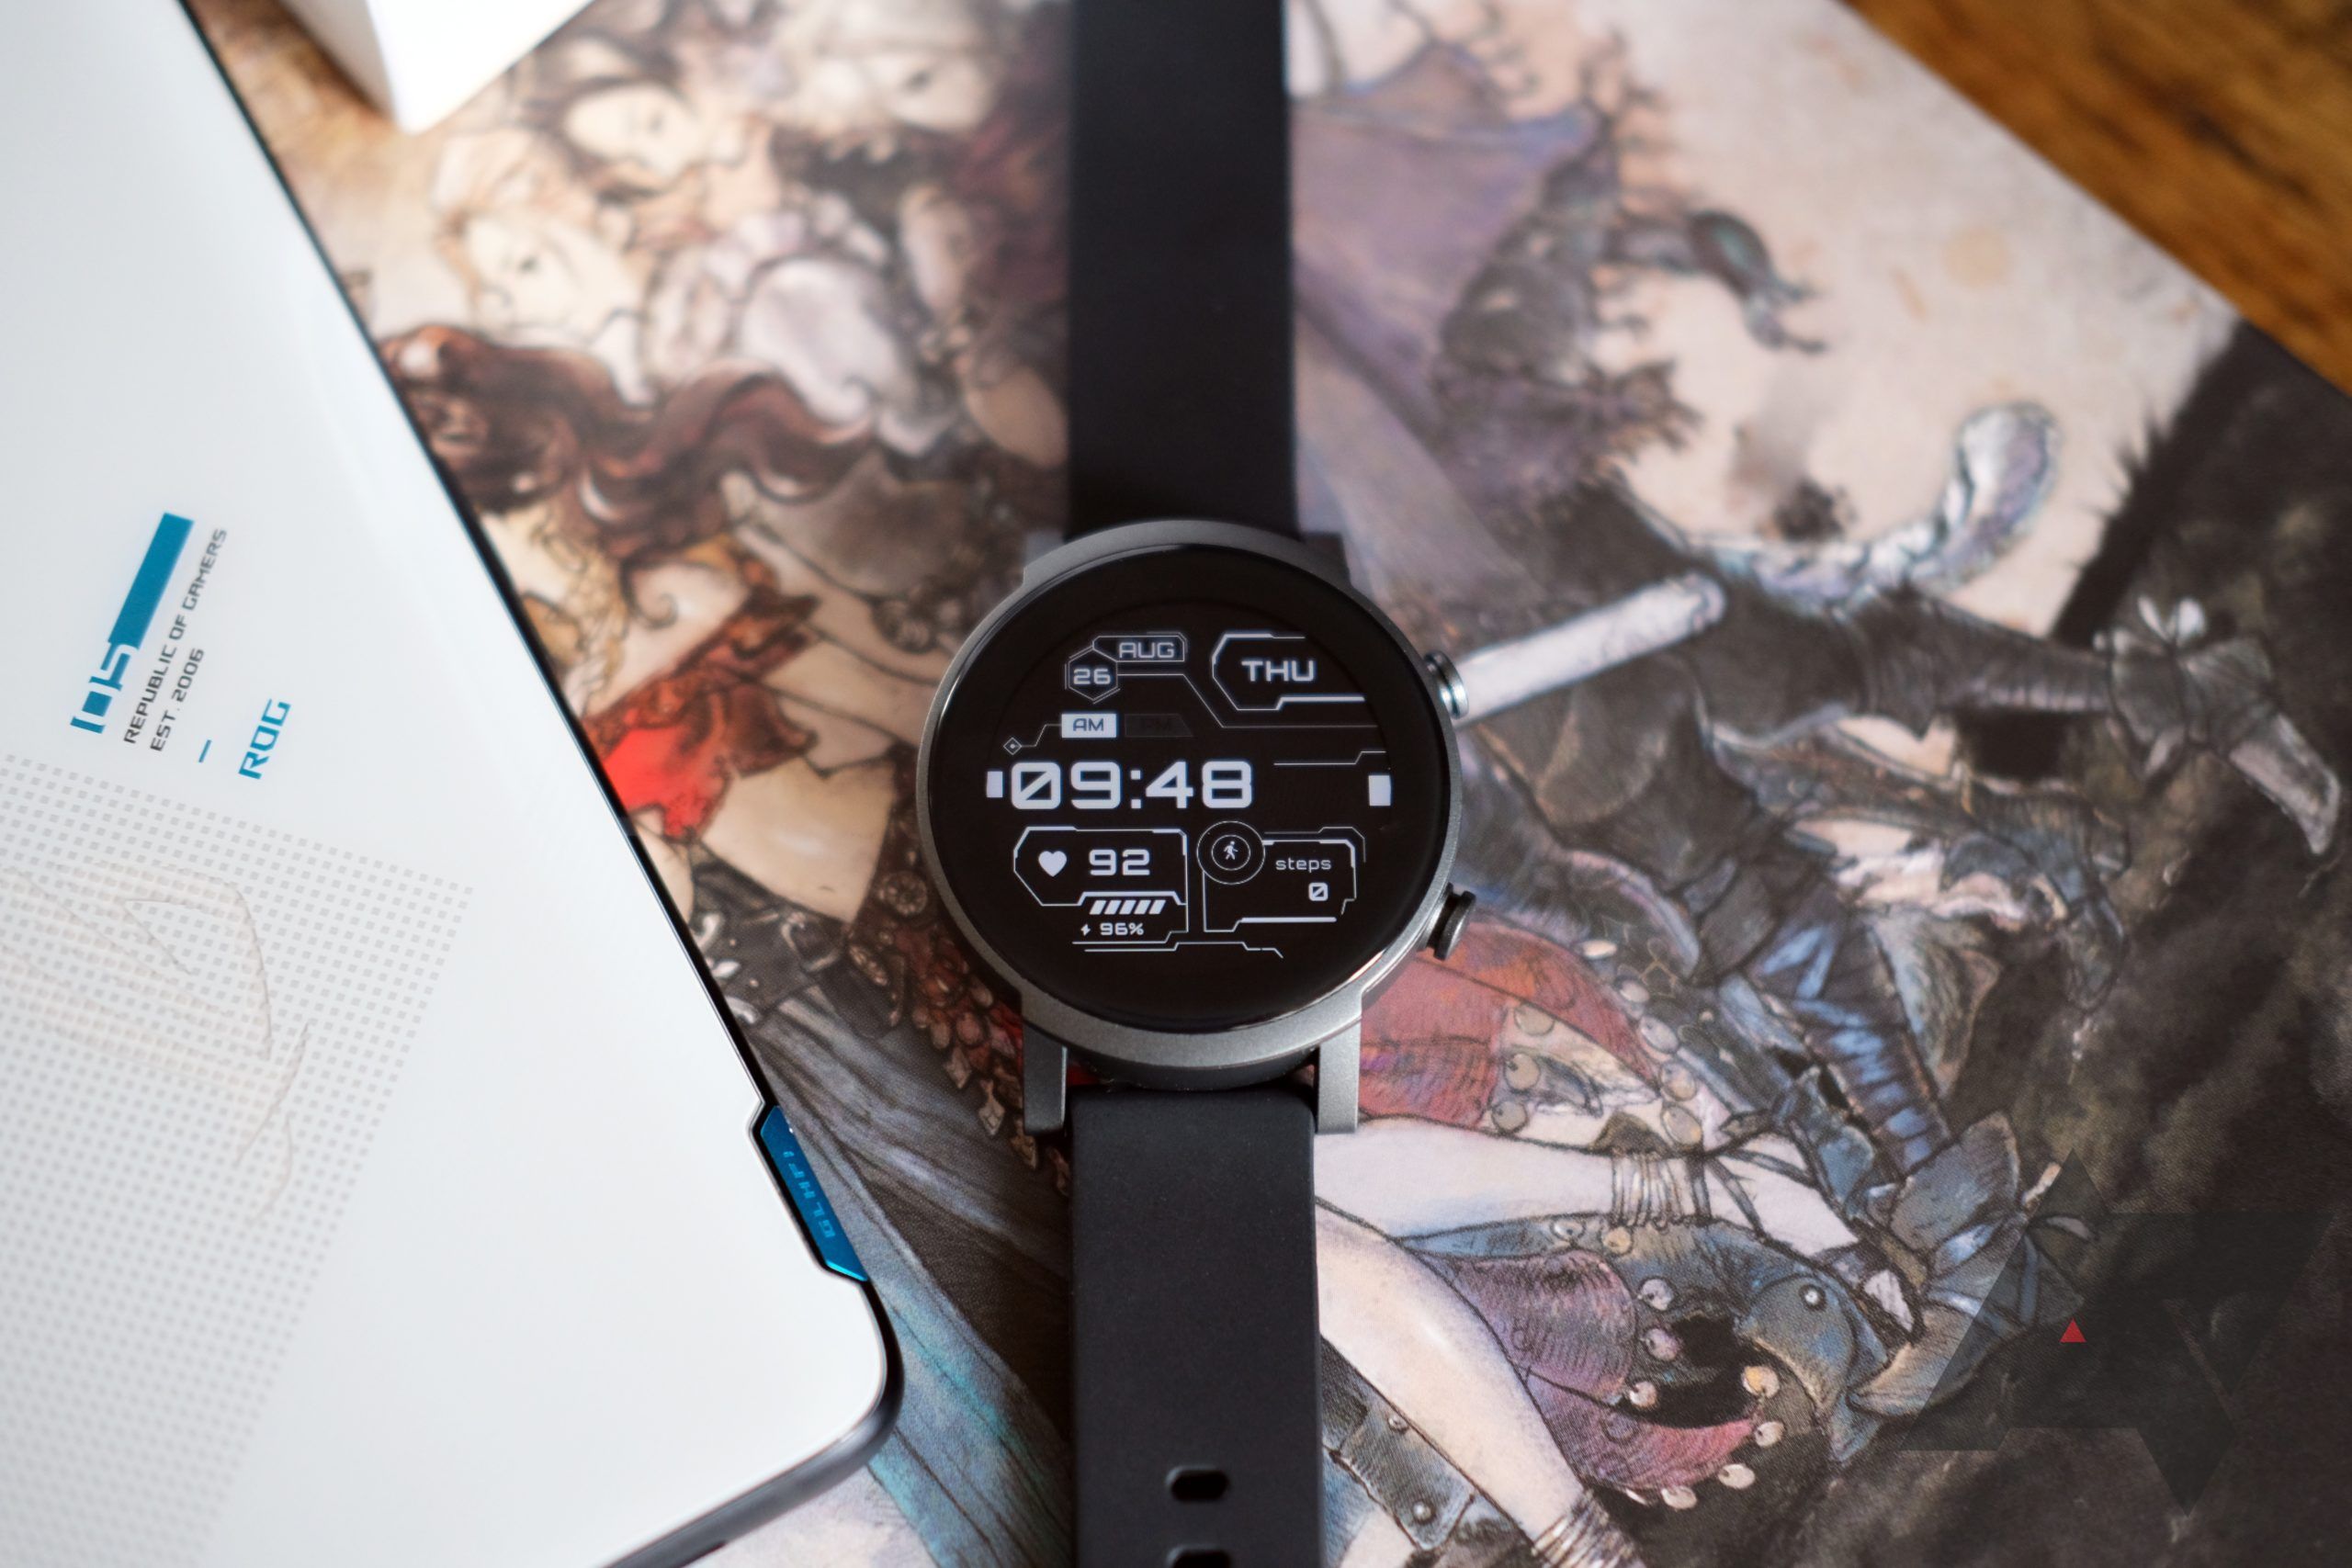 Mobvoi TicWatch E3 review: All dressed up with nowhere to go